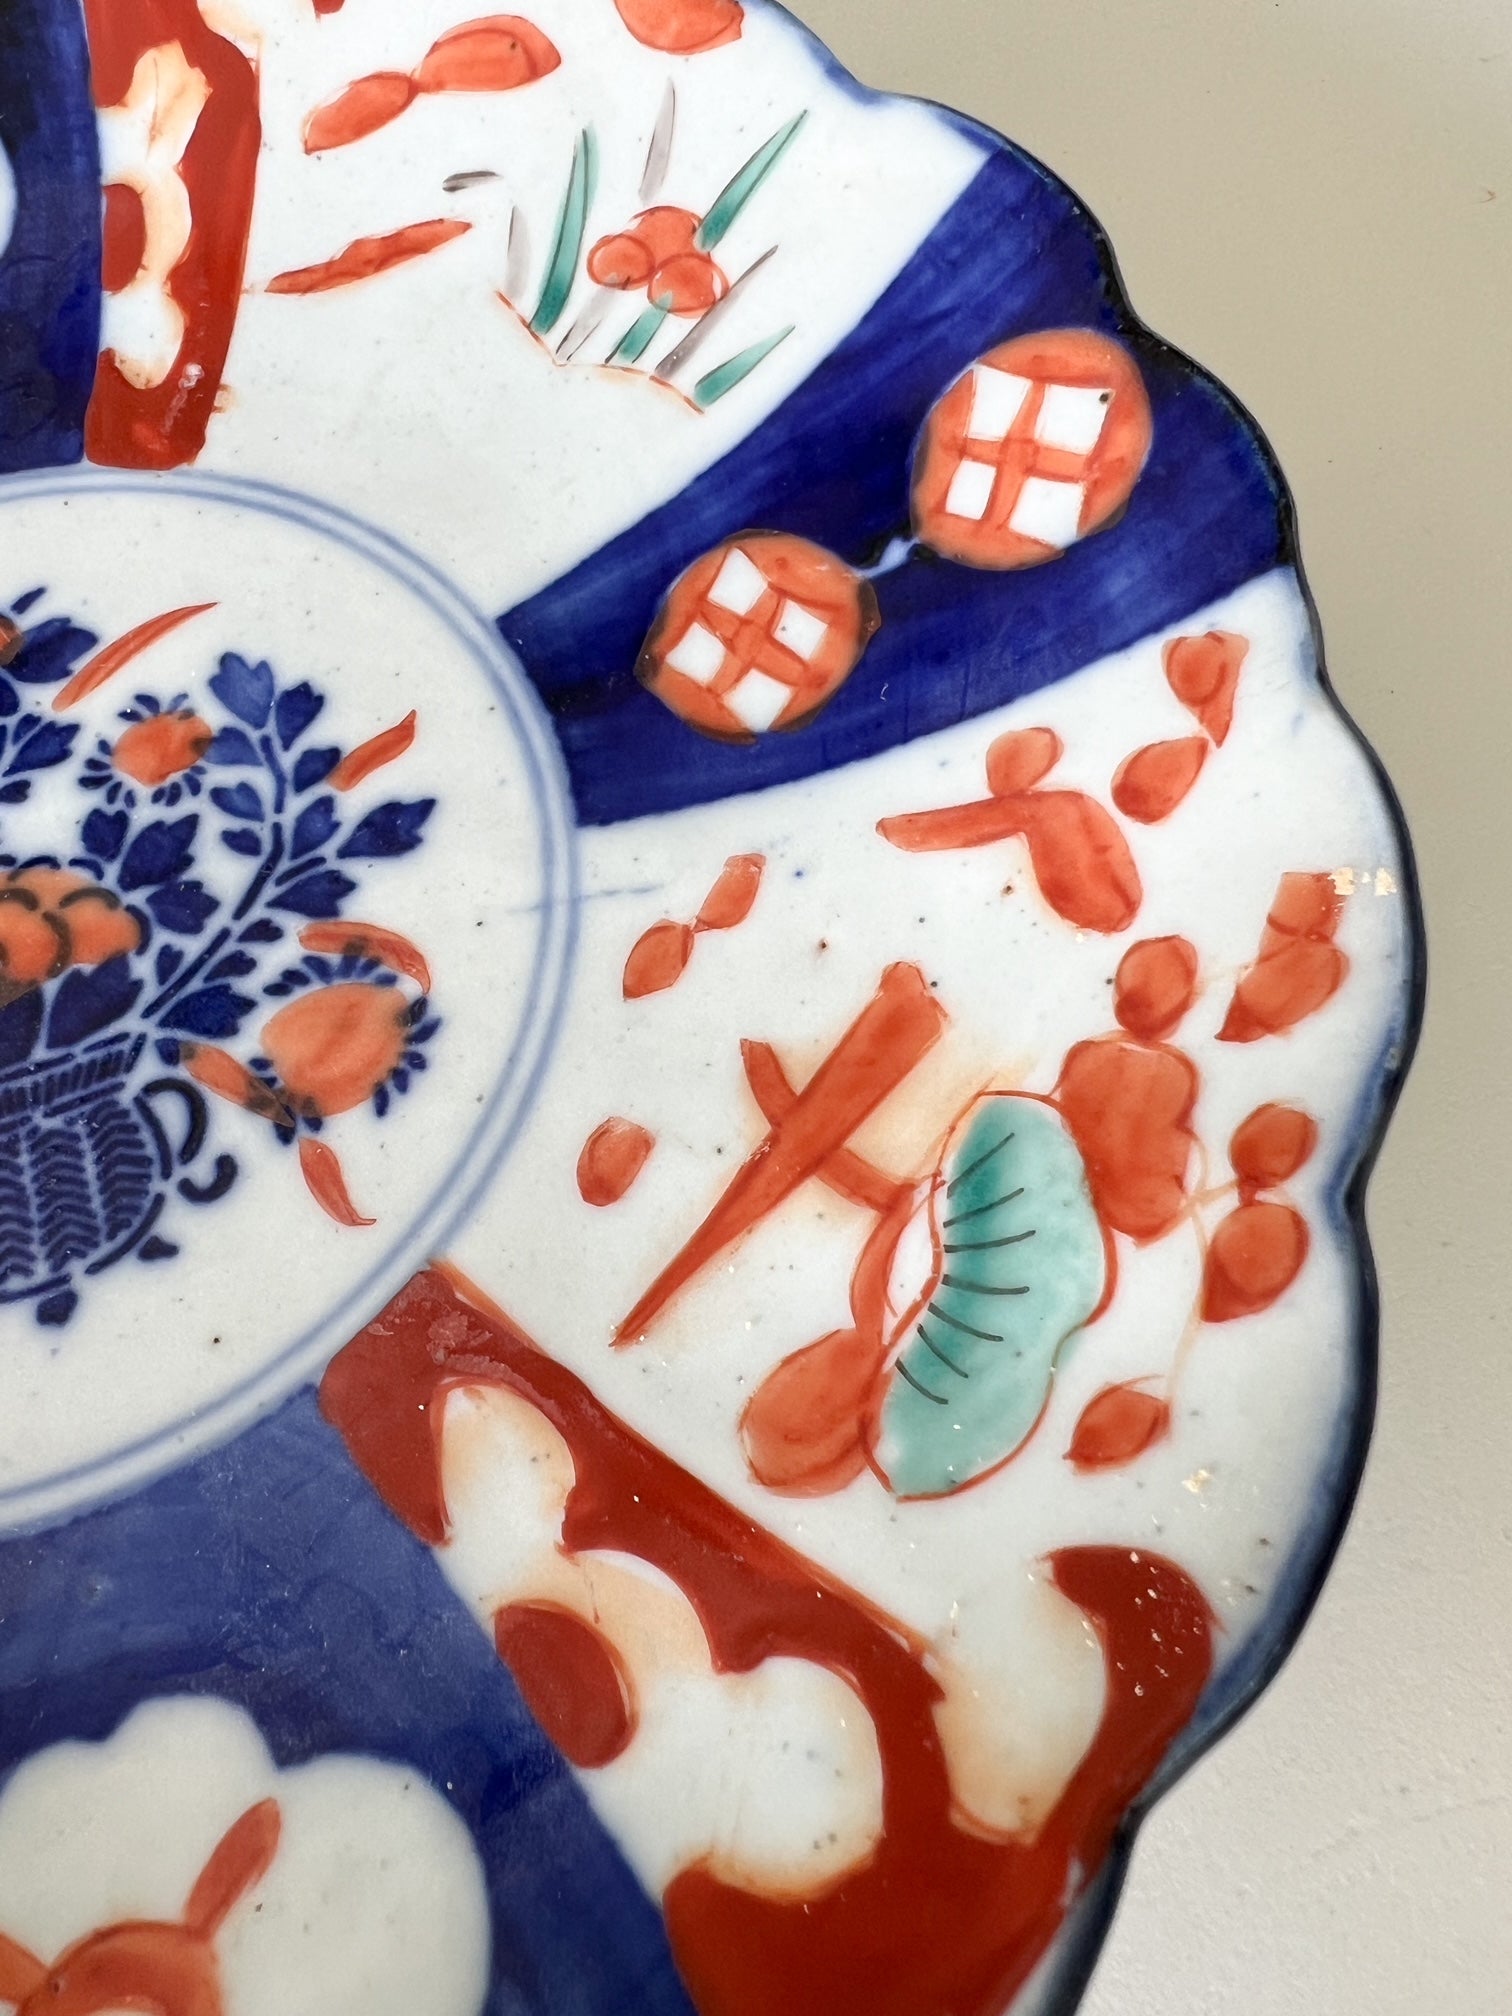 A close-up view of a hand-painted plate featuring scalloping along the edges